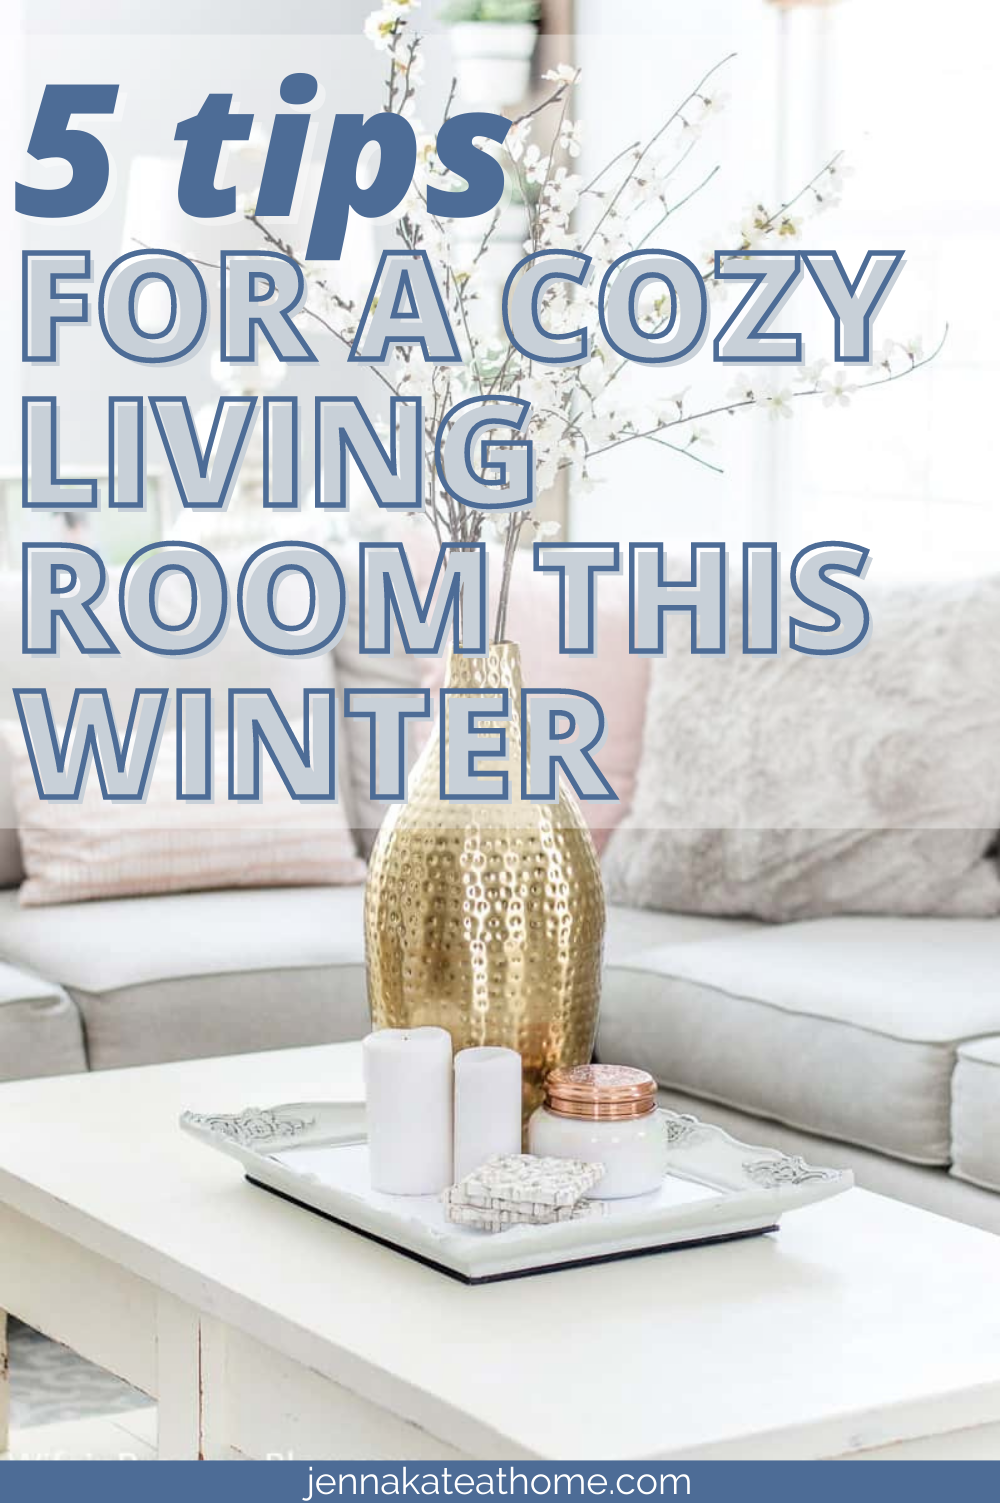 5 tips for a cozy living room this winter